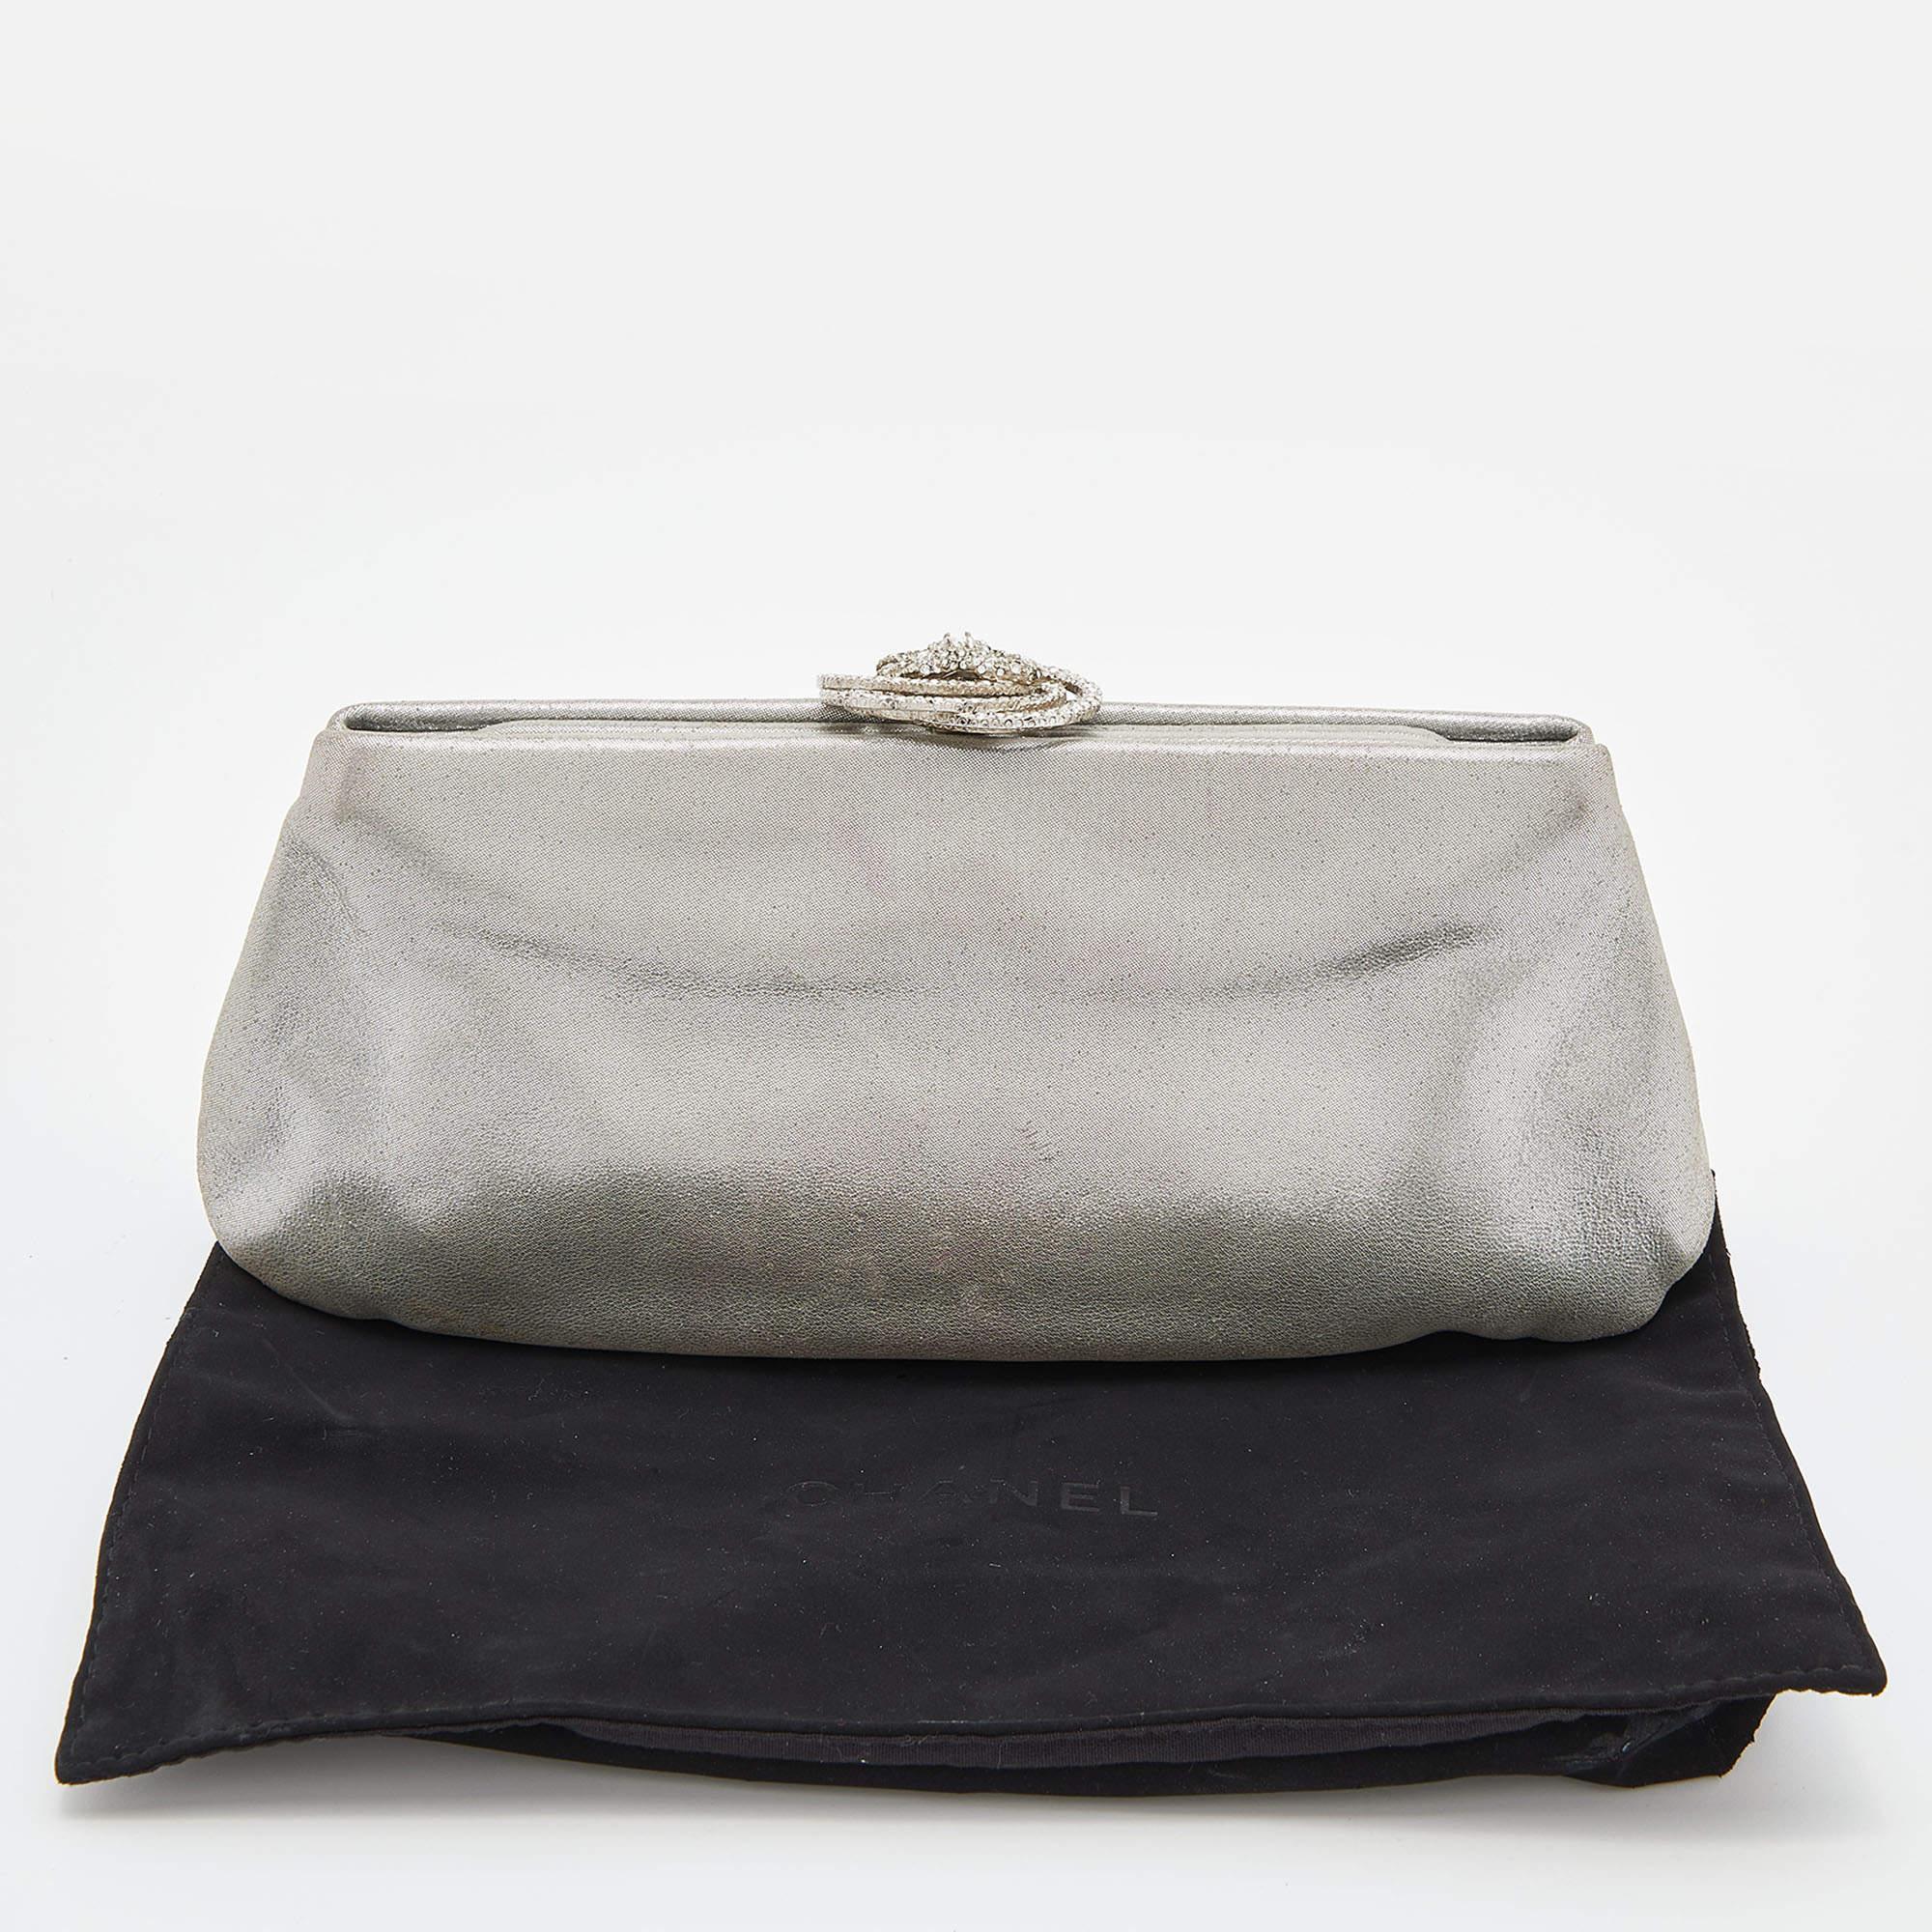 Chanel Silver Iridescent Leather Crystal Camellia Clutch 5